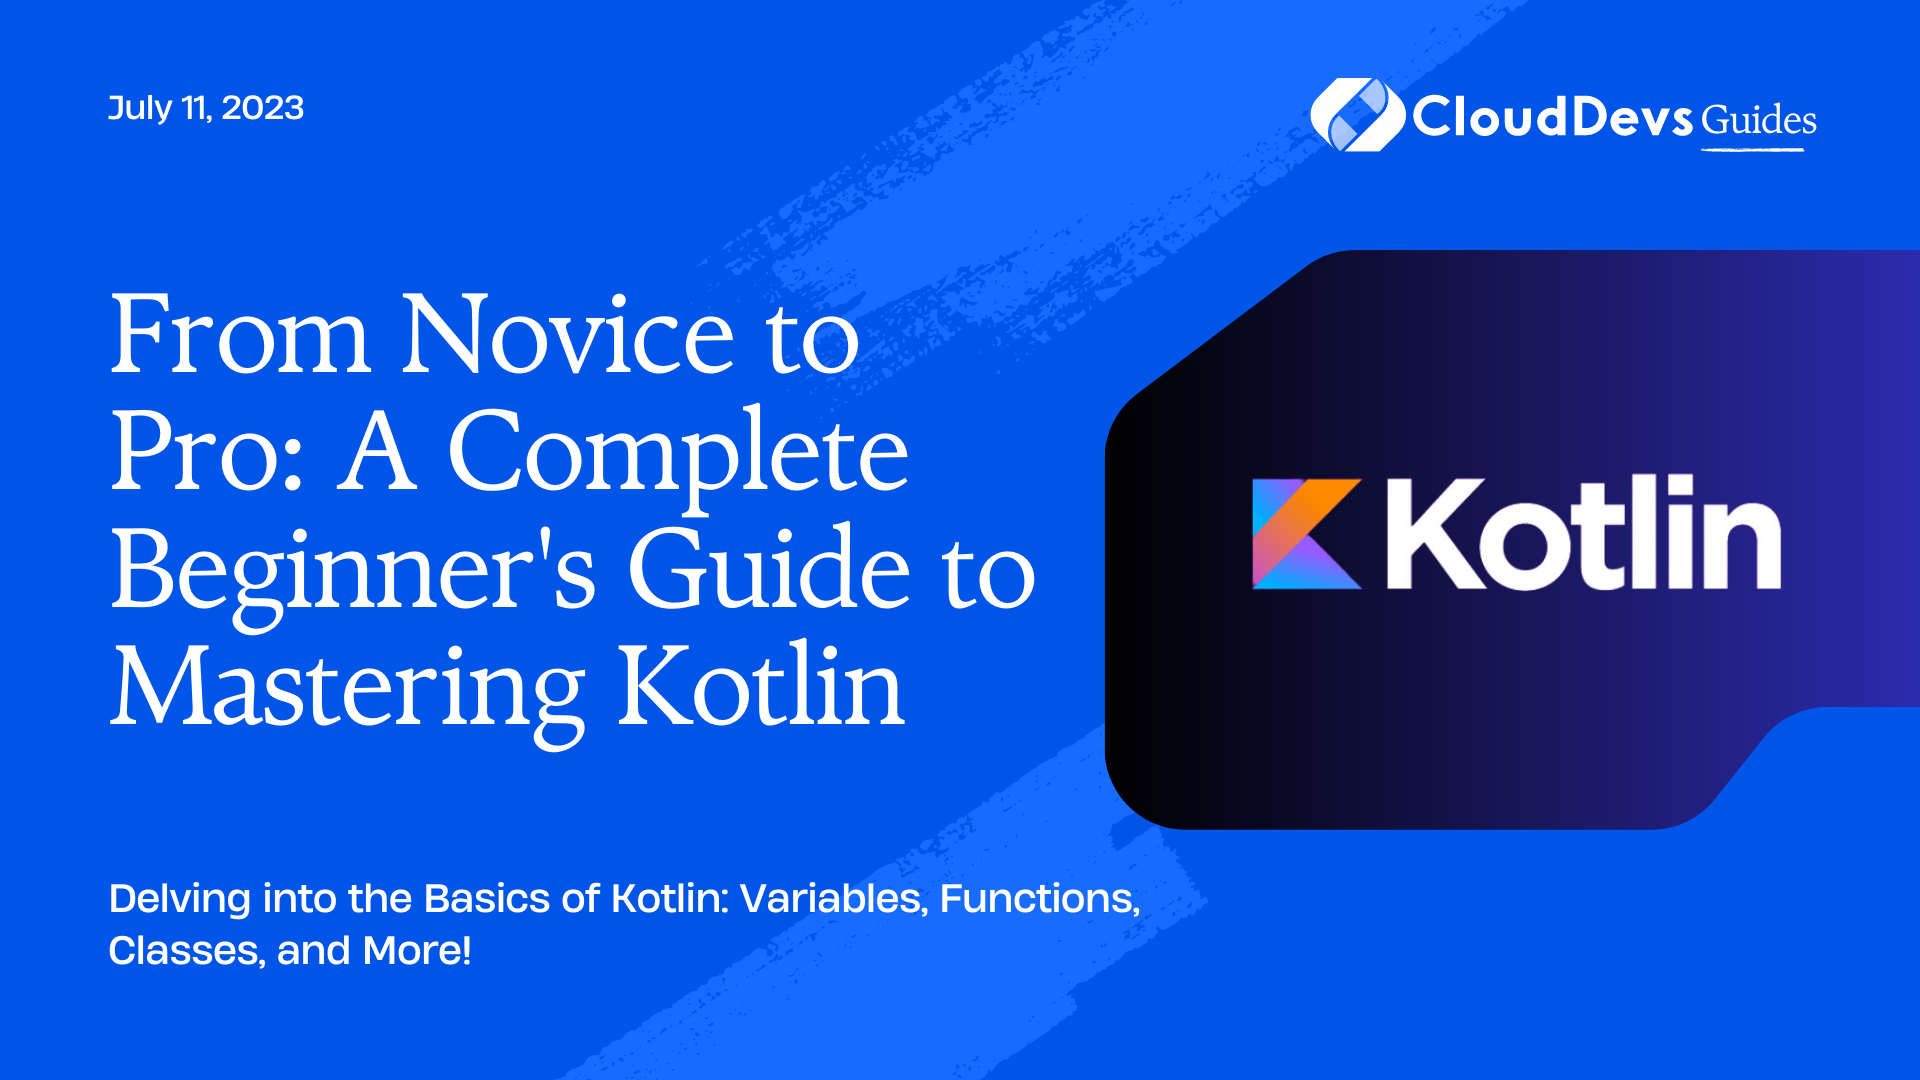 From Novice to Pro: A Complete Beginner's Guide to Mastering Kotlin